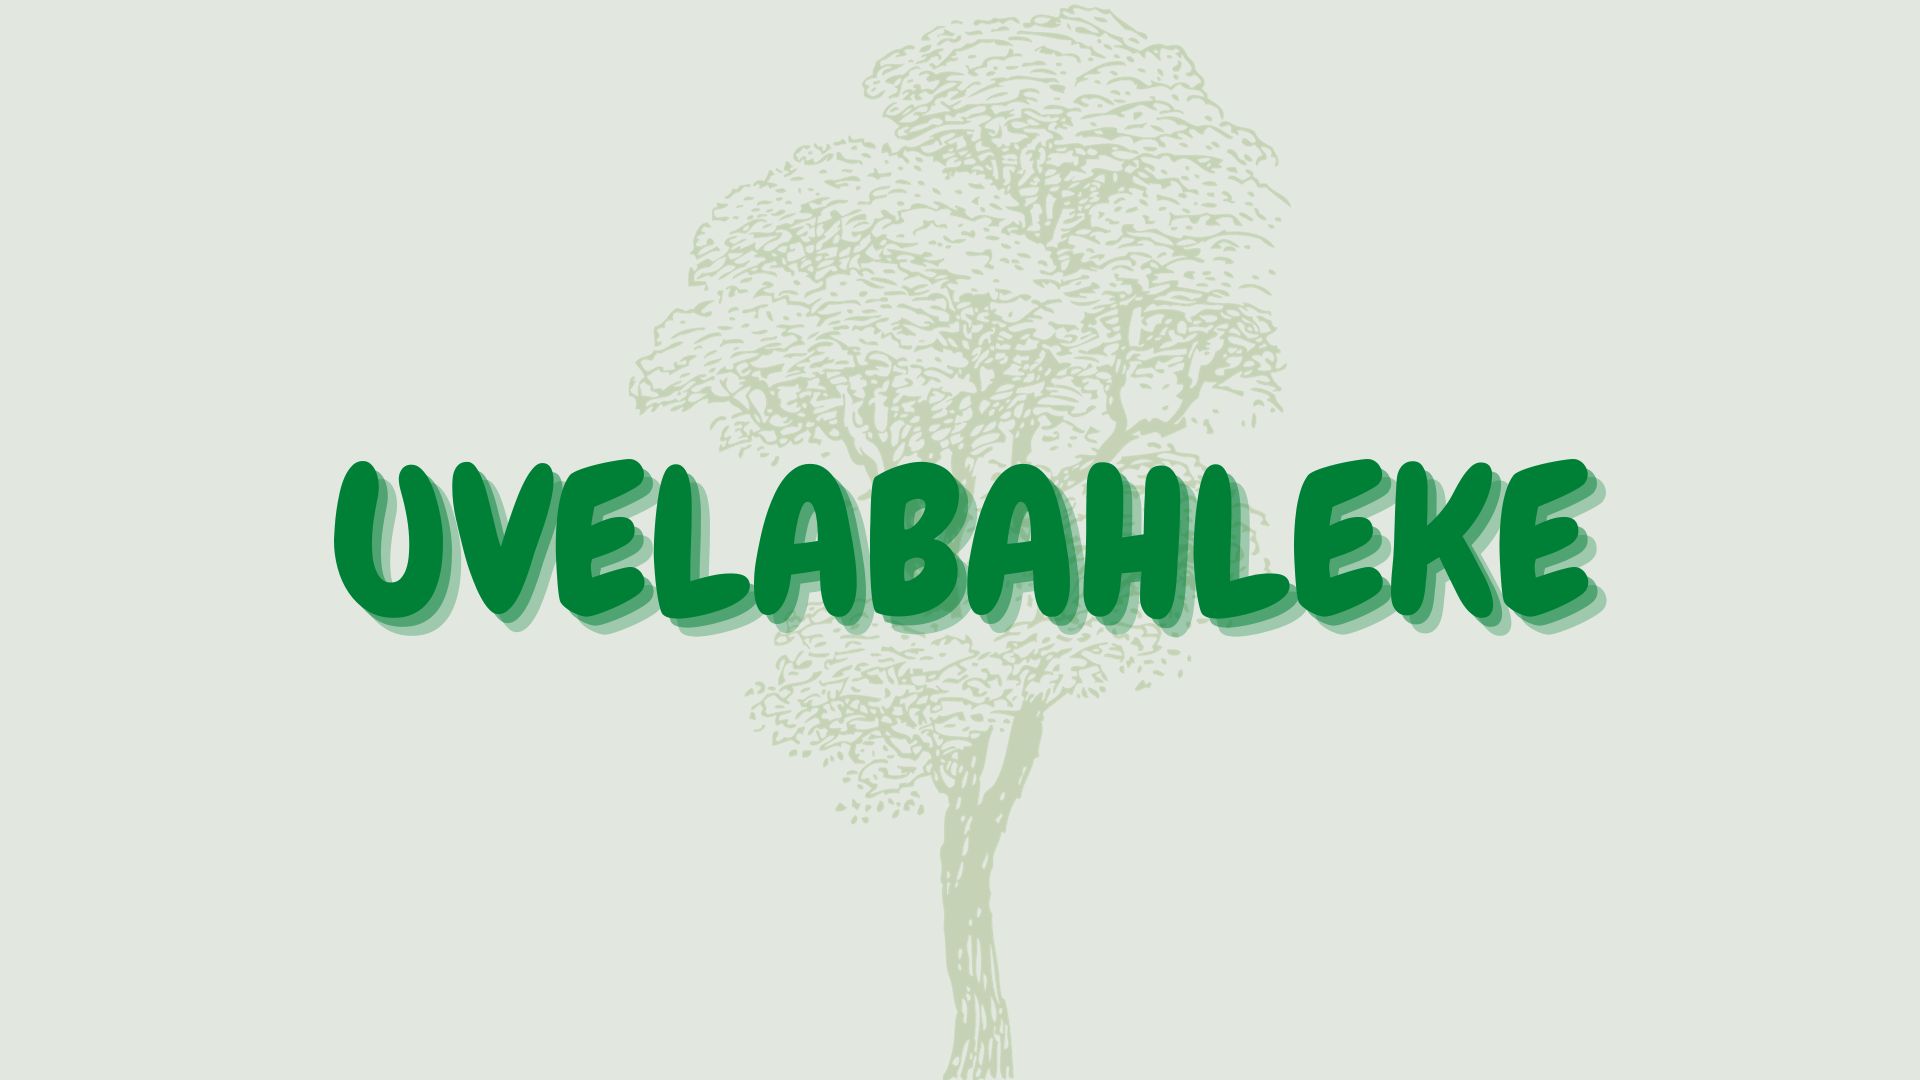 You are currently viewing Uvelabahleke